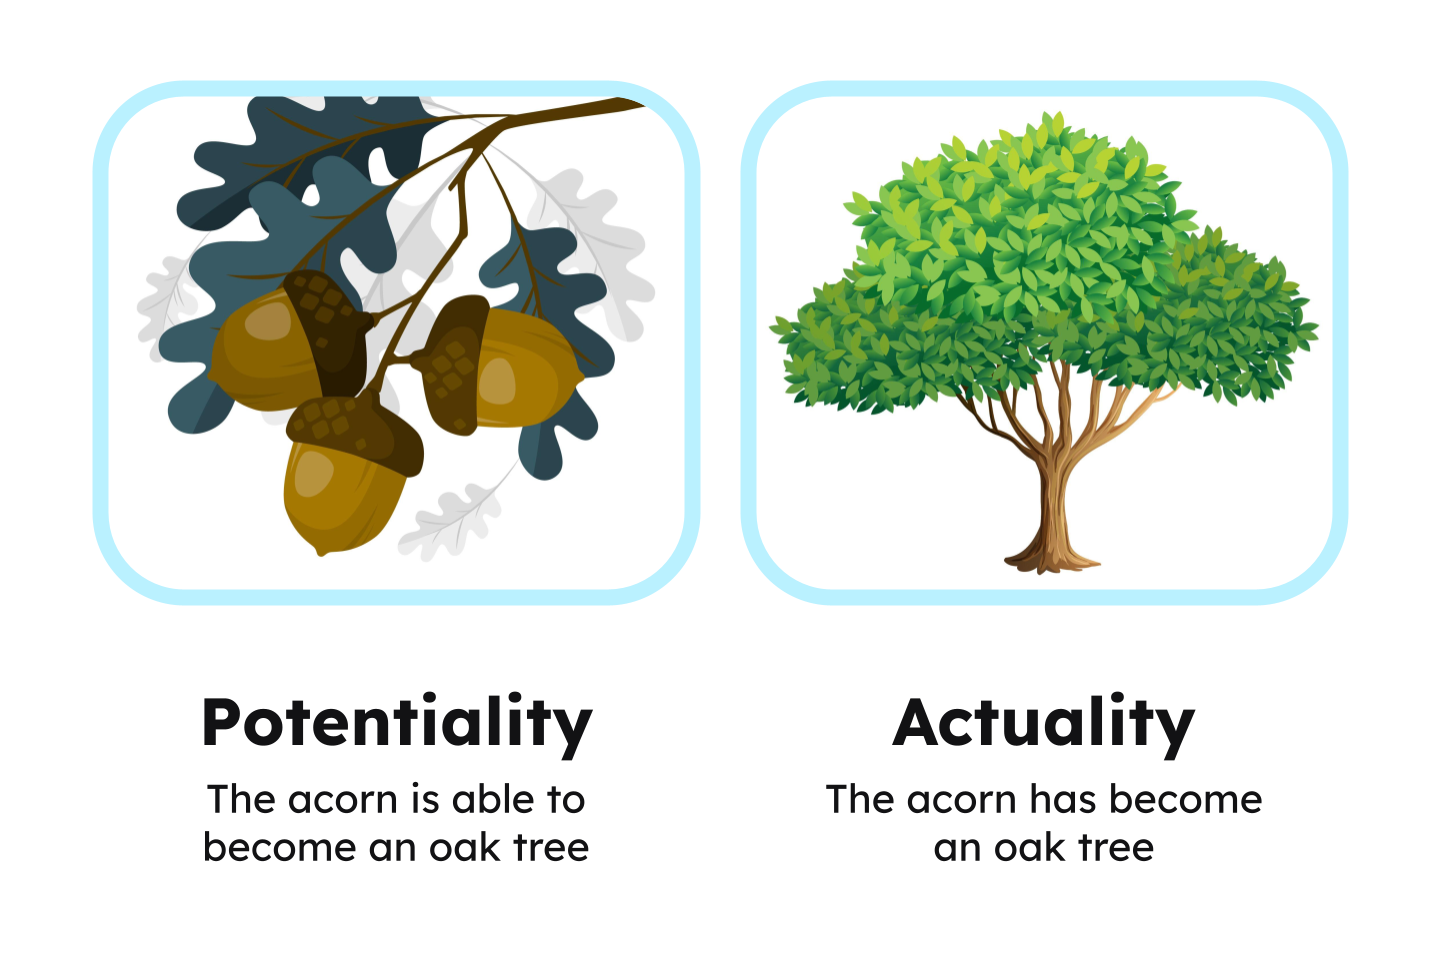 An image showing an acorn and an oak tree. Potentiality is the ability of an acorn to become an oak tree and actuality is an acorn that has become an oak tree.